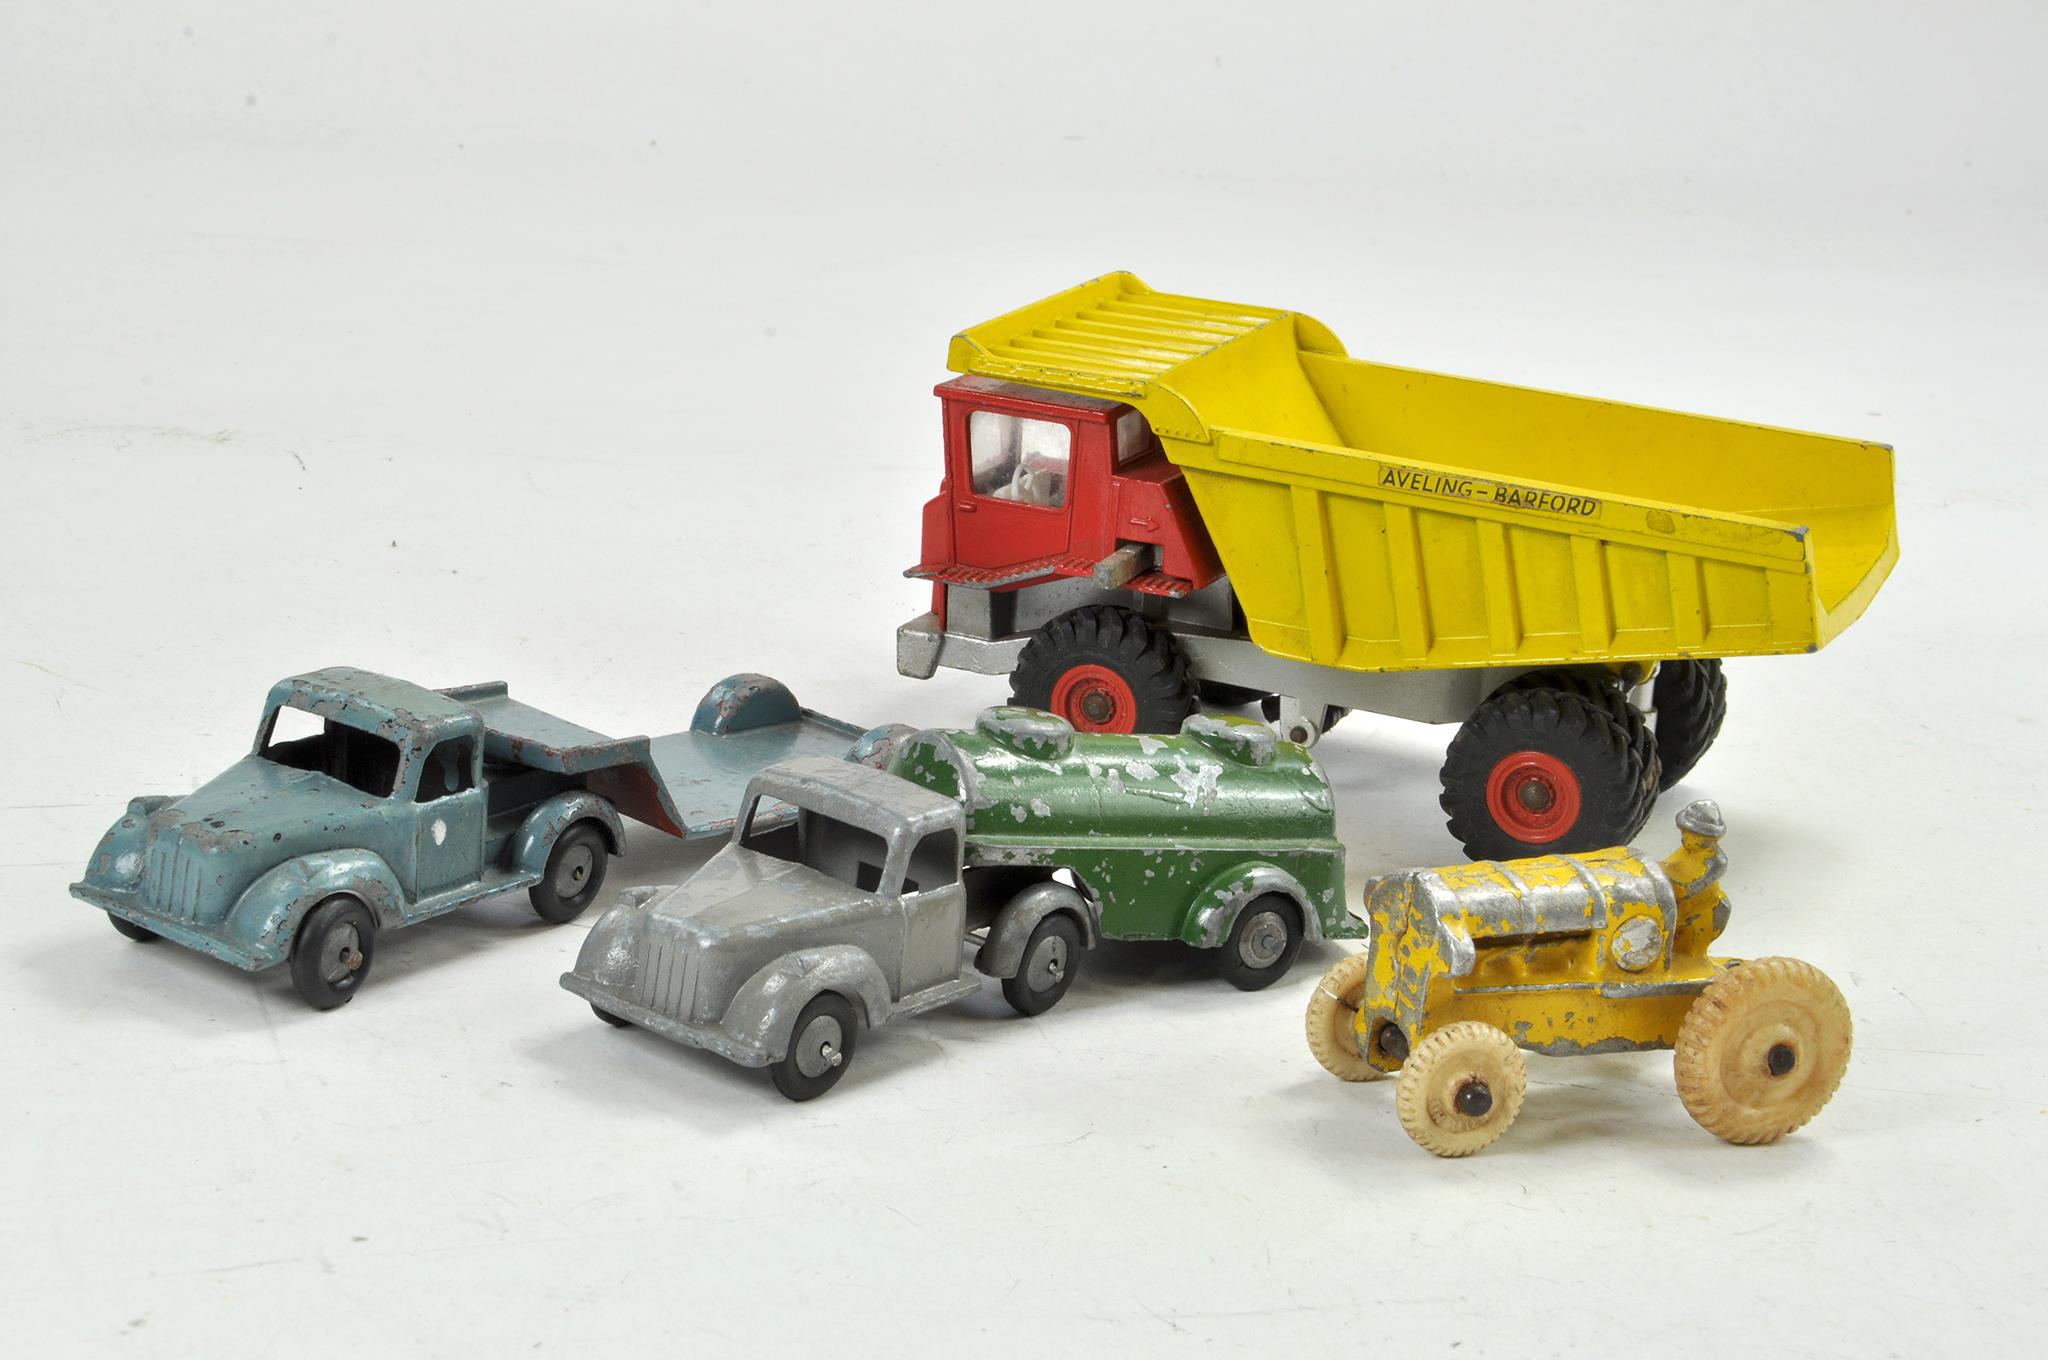 Dinky Aveling Barford Dump Truck plus Timpo vintage issues and American issue vintage tractor.